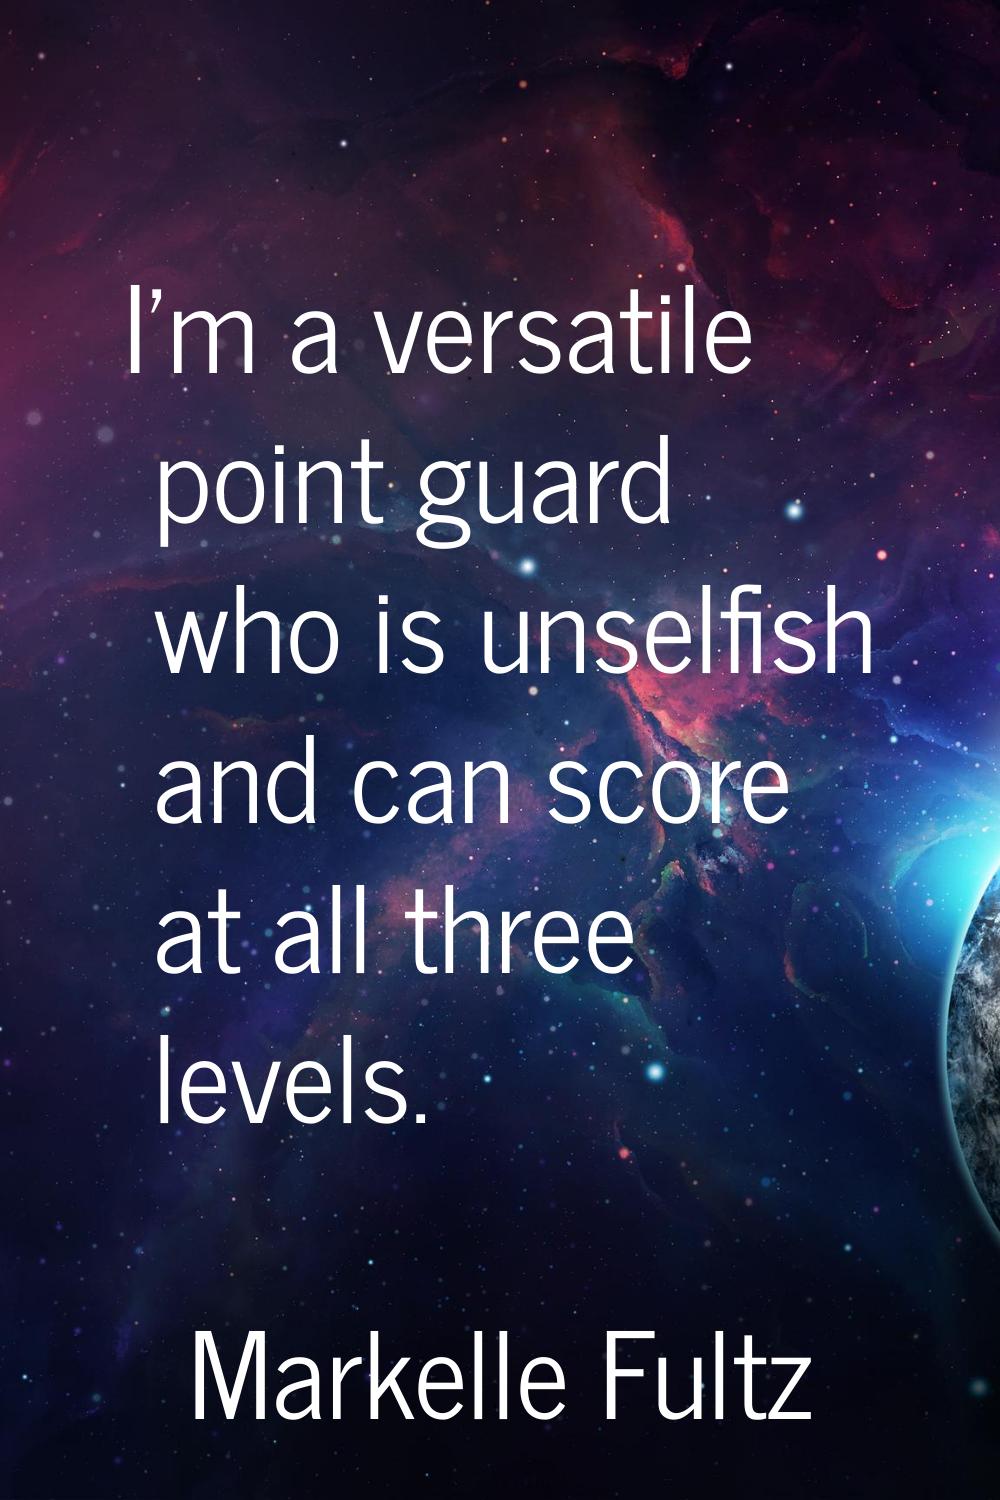 I'm a versatile point guard who is unselfish and can score at all three levels.